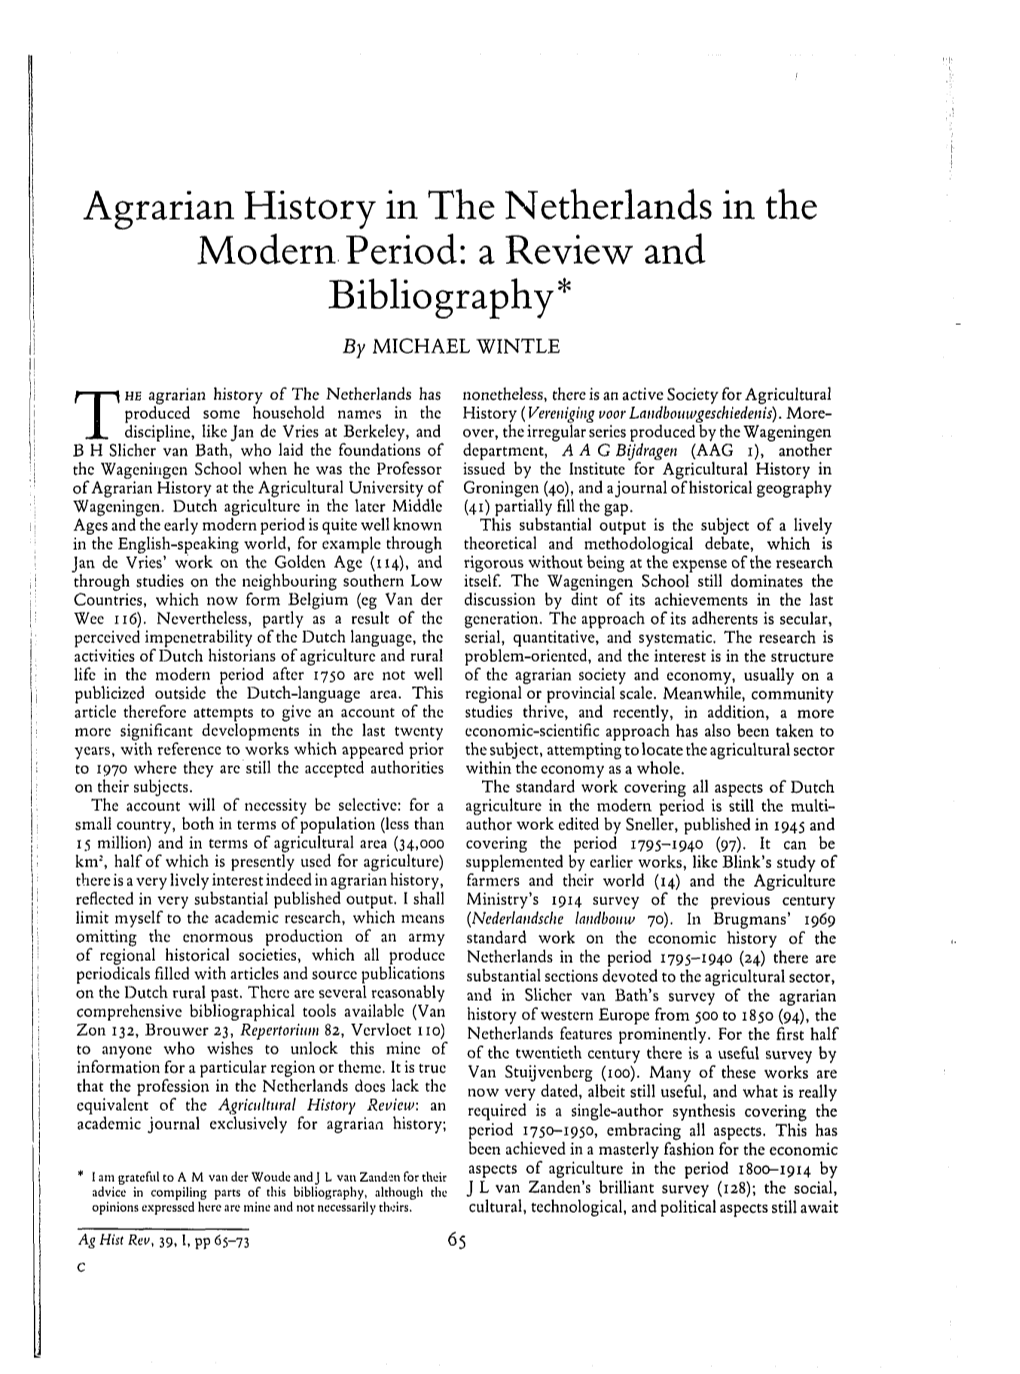 Agrarian History in the Netherlands in the Modern